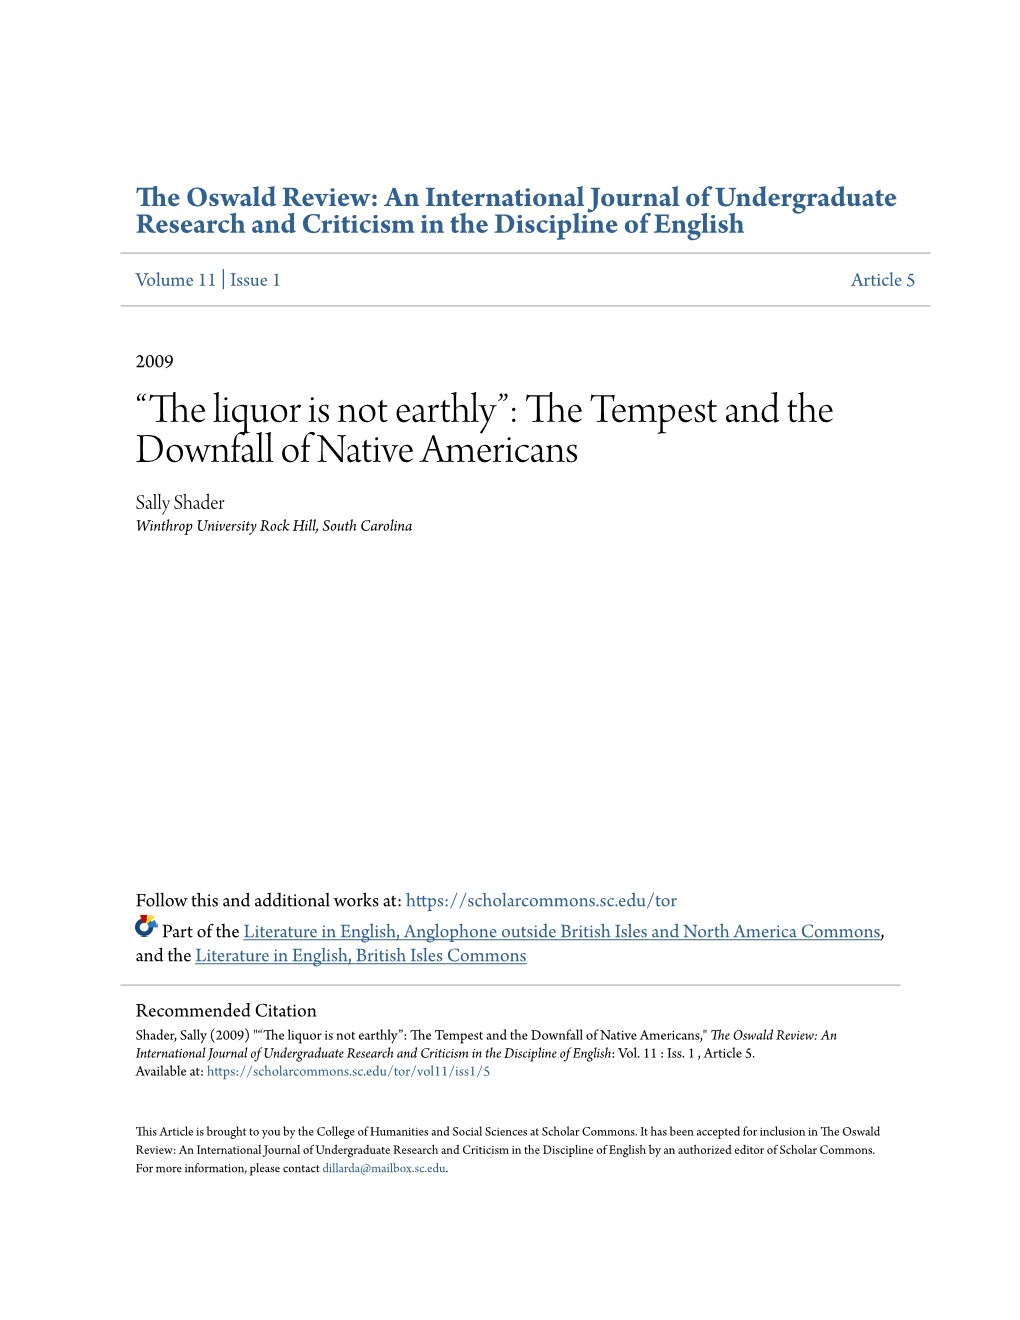 The Tempest and the Downfall of Native Americans